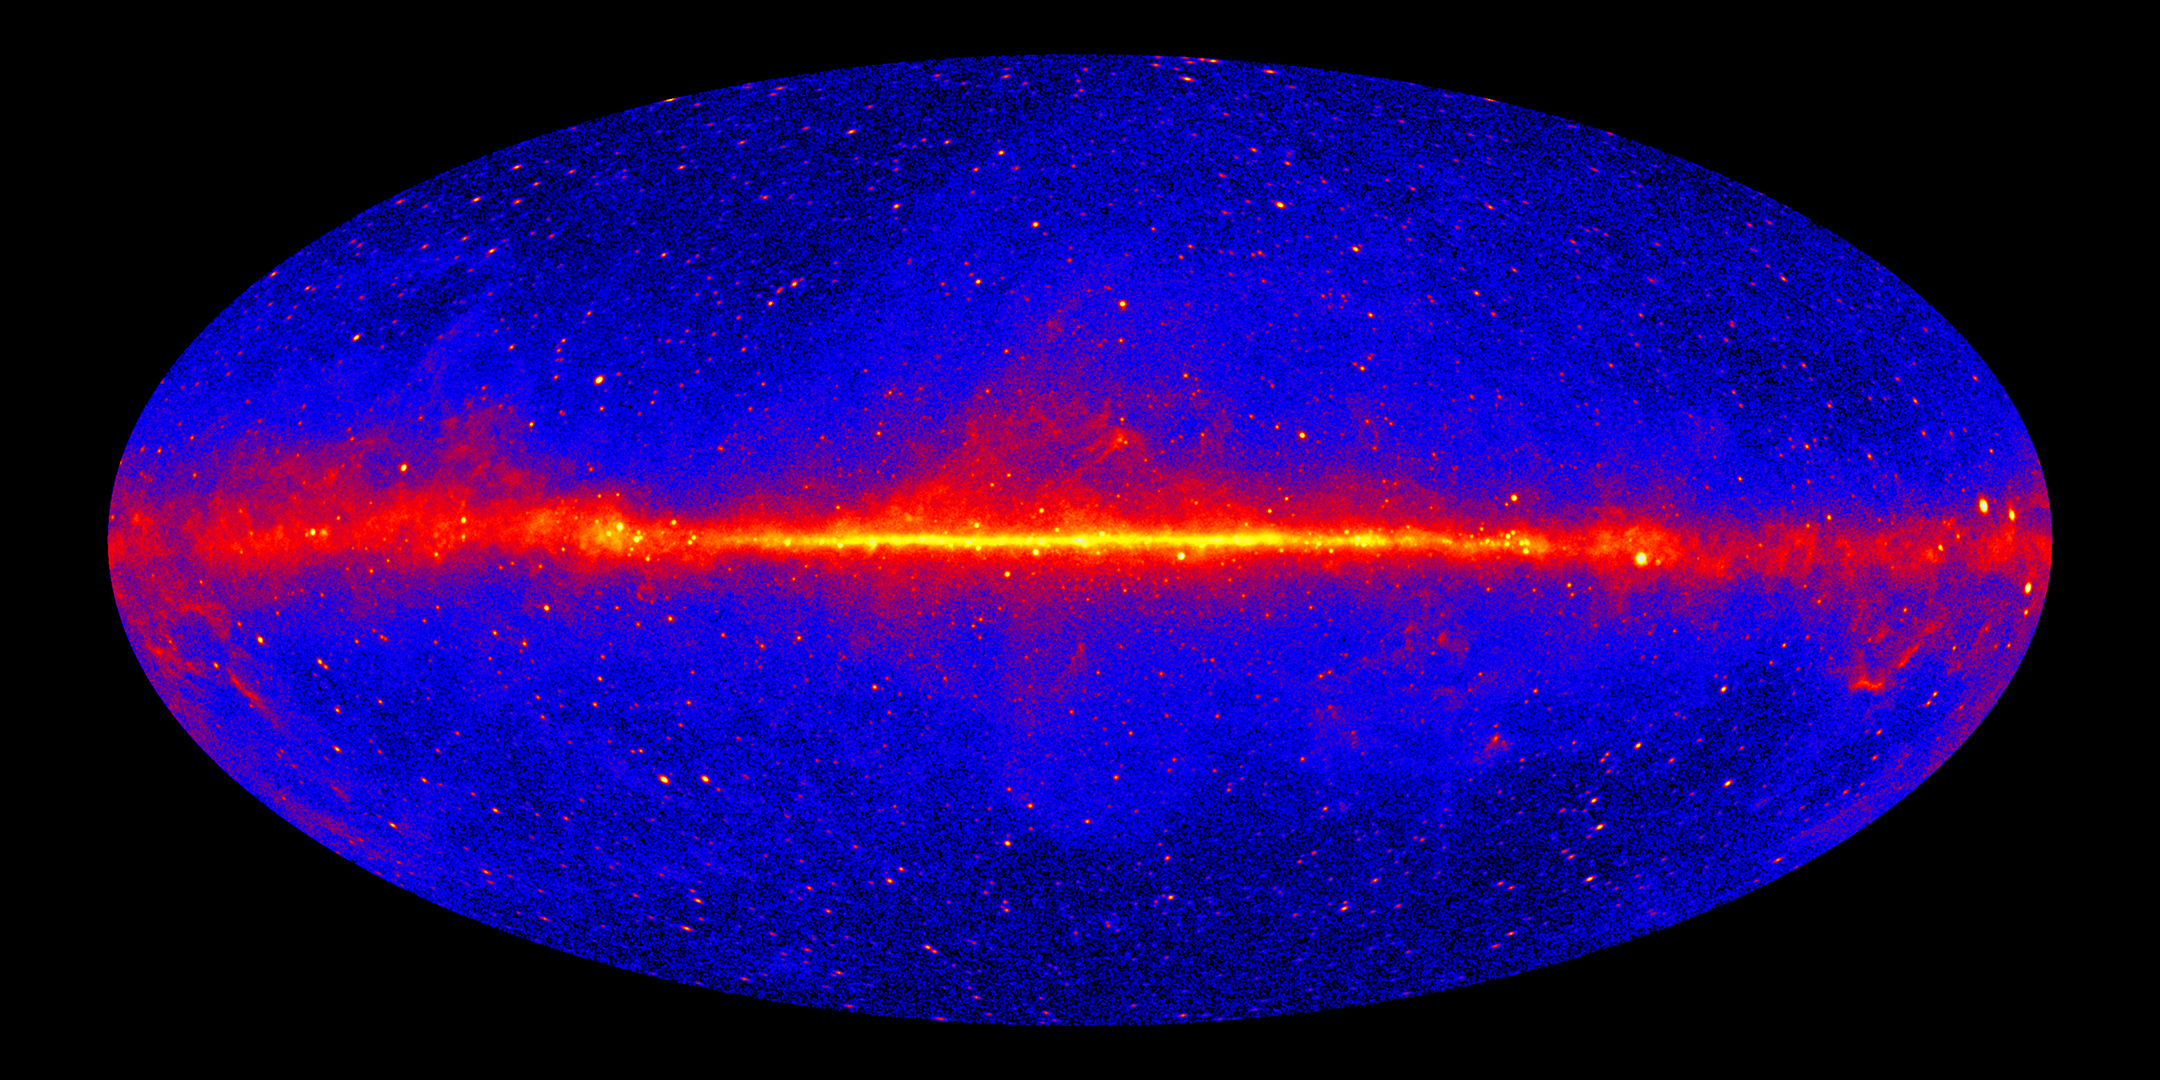 This image shows the sky as you would see it in gamma-ray light. It is an oval, which represents the sky folded out onto a flat surface. The oval is primarily blue, showing a background of gamma-rays that permeates the entire sky. A bright band in shades of yellow, orange, and red goes across the center of the image from left to right, which shows gamma rays from the plane of the Milky Way. There are dots of yellow and red throughout the rest of the image, indicating distant galaxies that emit gamma rays.